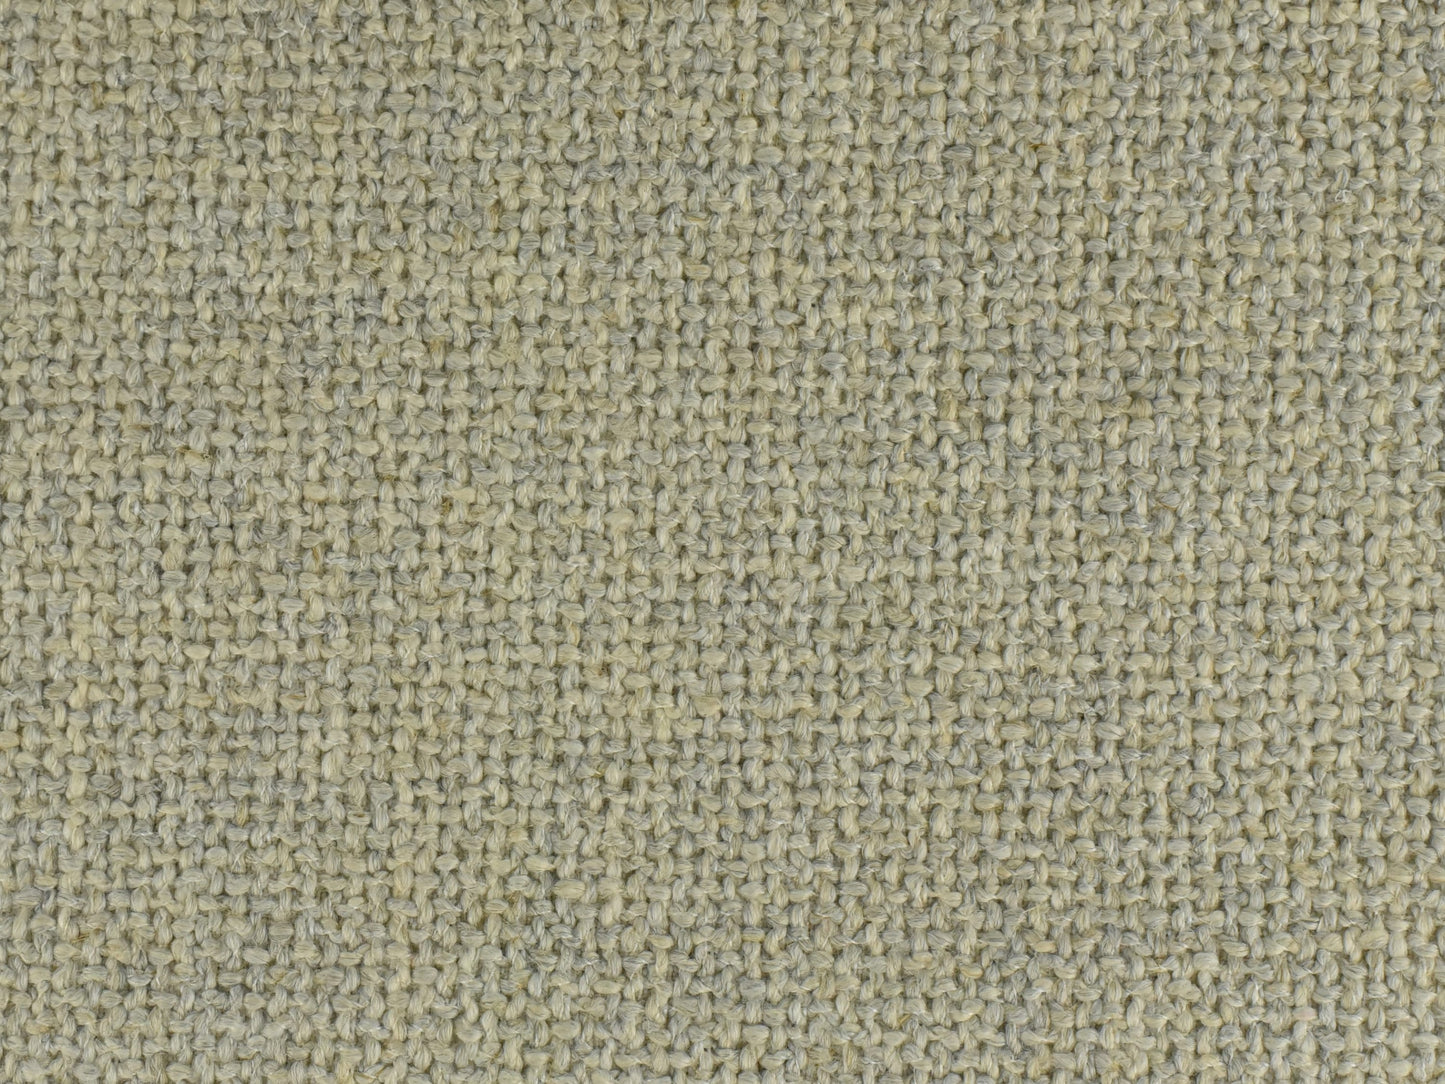 Heavy Duty White Beige Linen Blended Sofa Couch Fabric By The Yard|Thick and Heavy Weight Upholstery Fabric For Chair Headboard-680GSM Sand